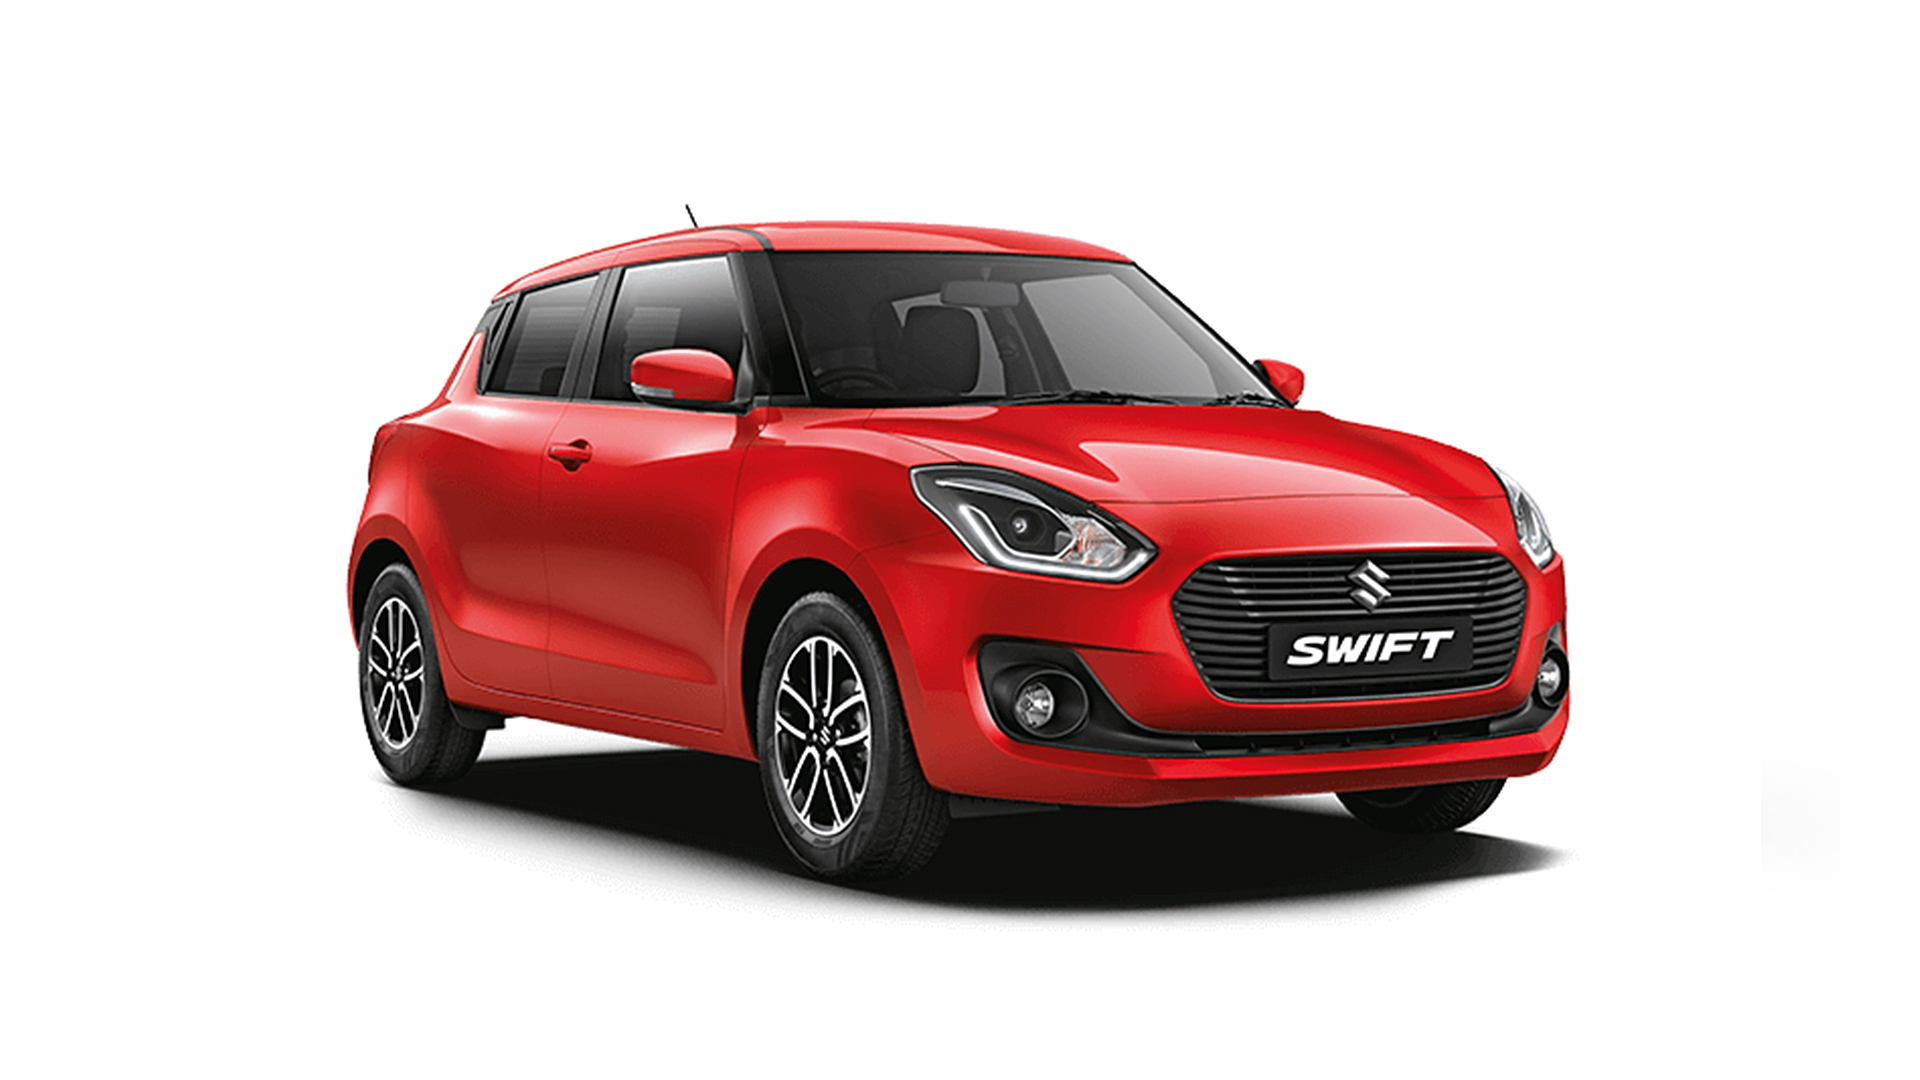 Swift [2018-2021] Images - Interior & Exterior Photo Gallery [150+ Images]  - CarWale